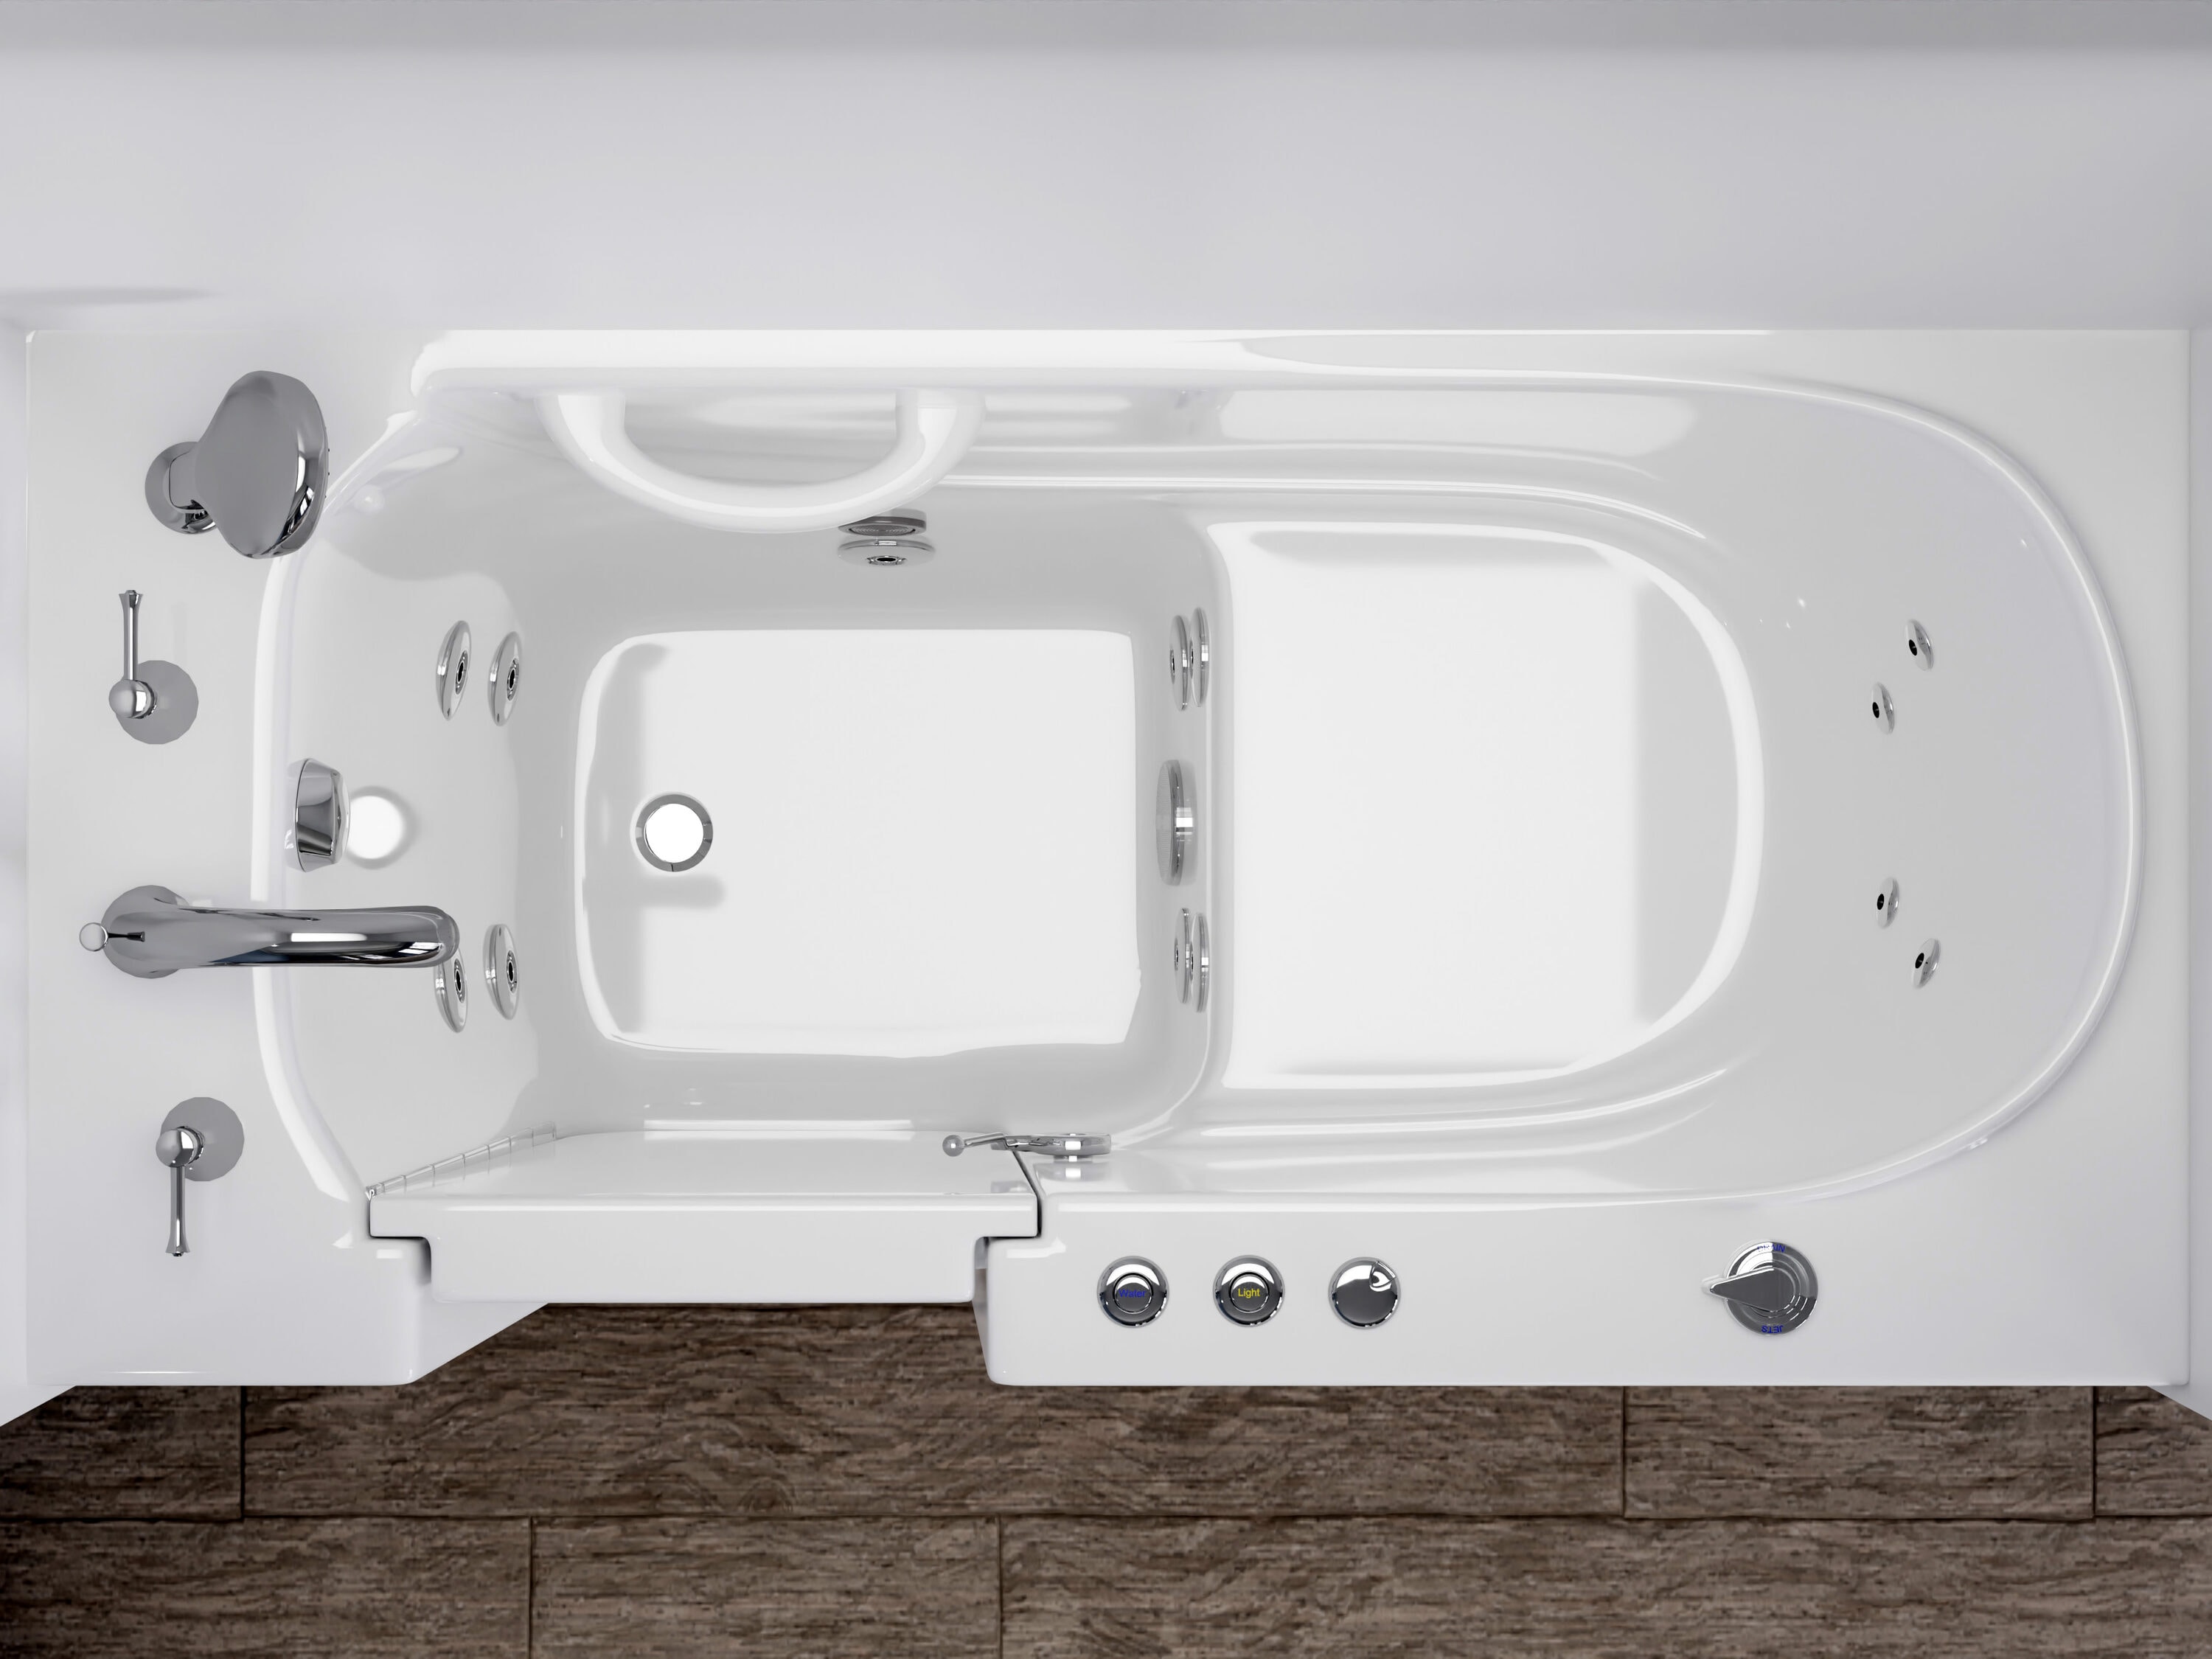 Swcorp 2753FLWL Left Drain Fully Loaded Walk-In Bathtub with Air Jets & Whirlpool Massage Jets Hot Tub, White